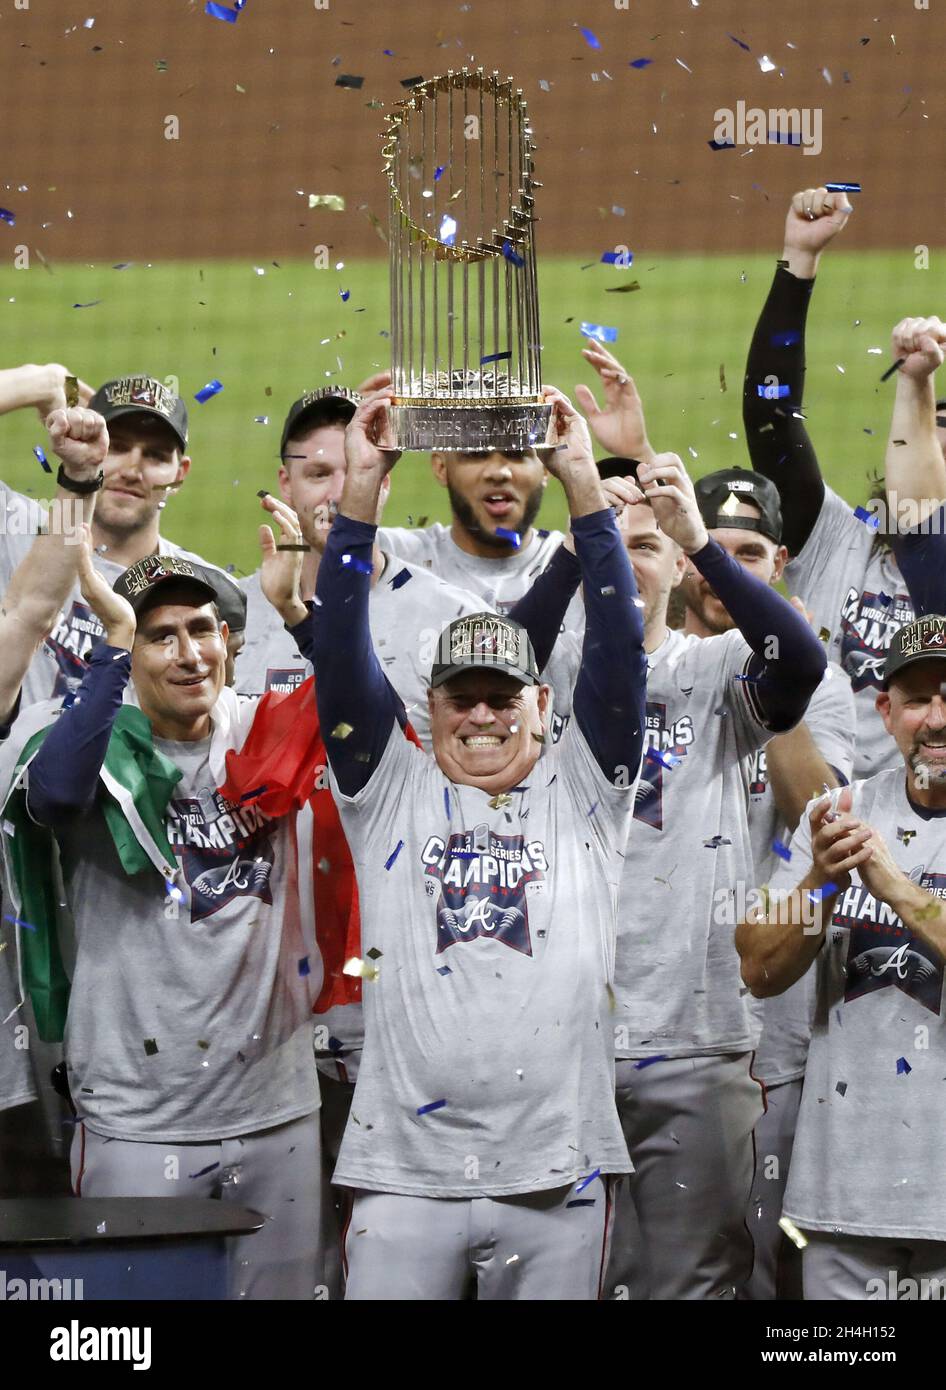 Houston, Texas. Nov. 2, 2021, Atlanta Braves manager Brian Snitker (C)  holds up the trophy after winning Game 6 of the World Series against the  Houston Astros on Nov. 2, 2021, at